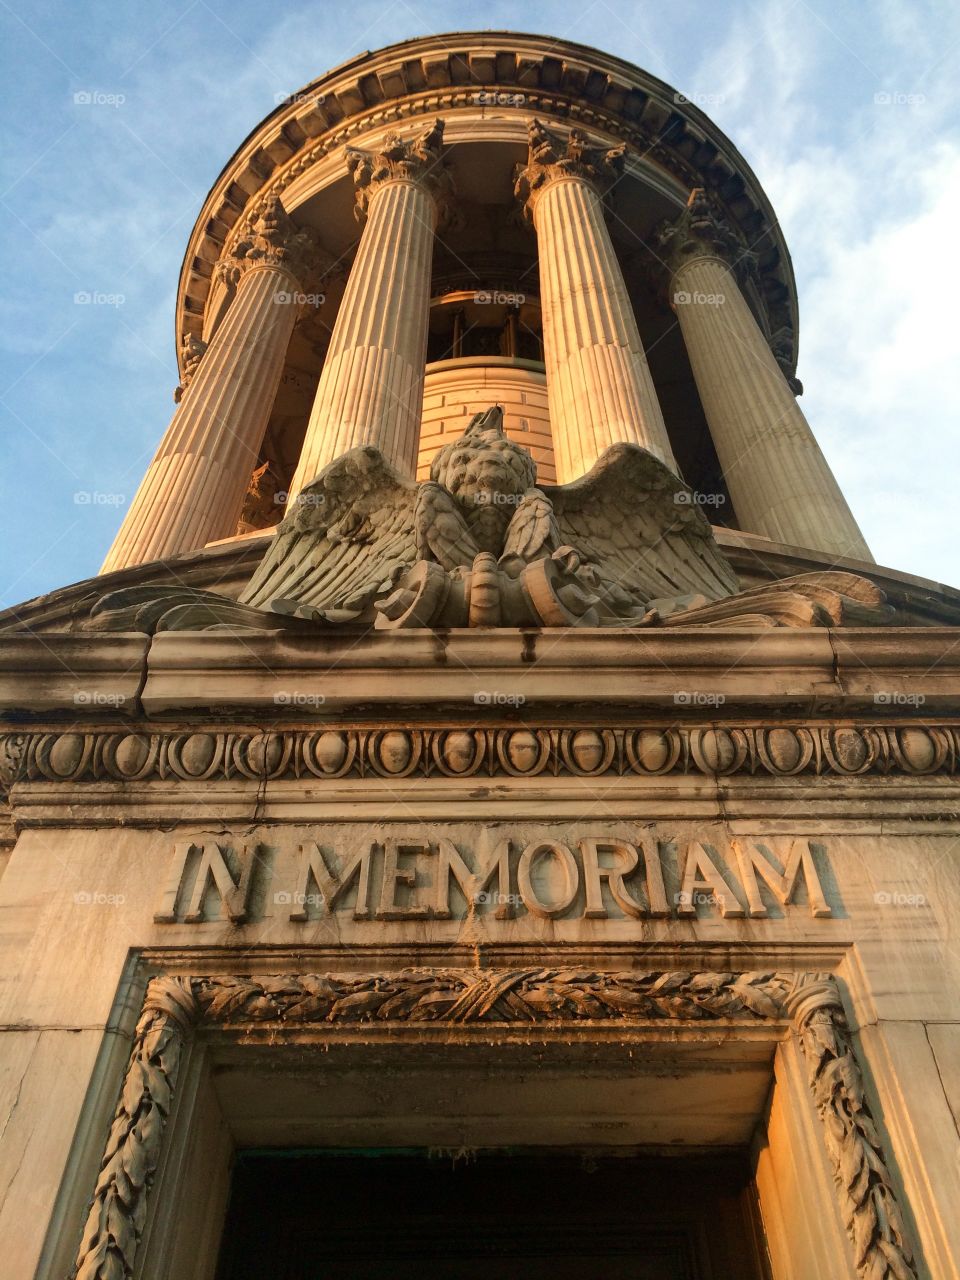 Remembering Soldiers & Sailors. The Soldiers and Sailors Memorial rises against the sky on the Upper West Side of New York City.